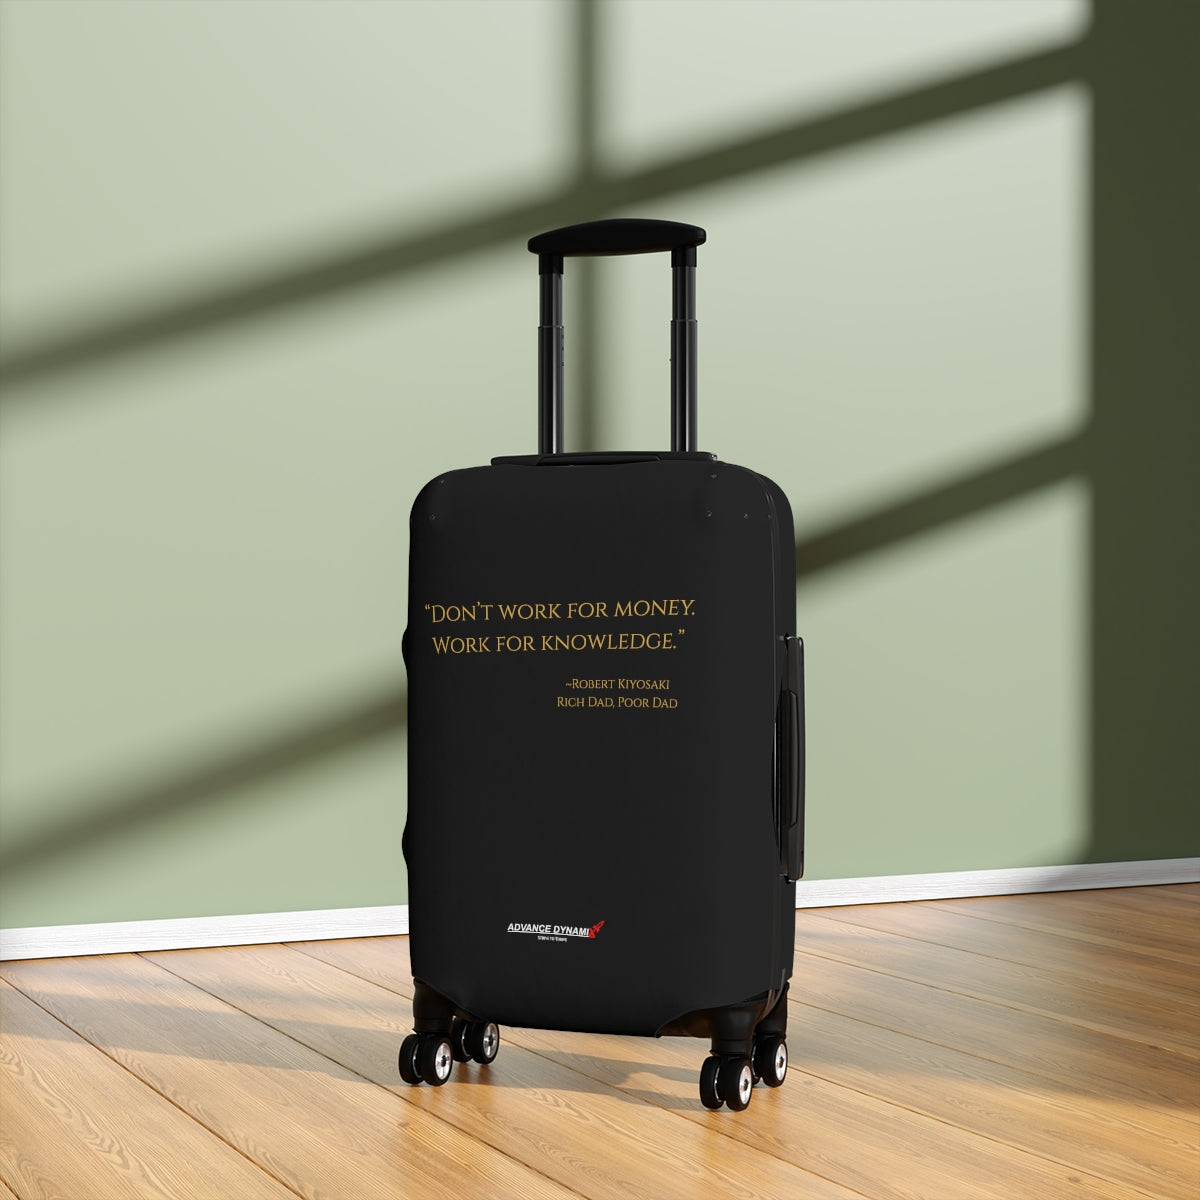 "Don't work for money. Work for..." ~Robert Kiyosaki, Rich Dad, Poor Dad - Luggage Covers Infused with Advance Dynamix Add-A-Tude - Tell the world!